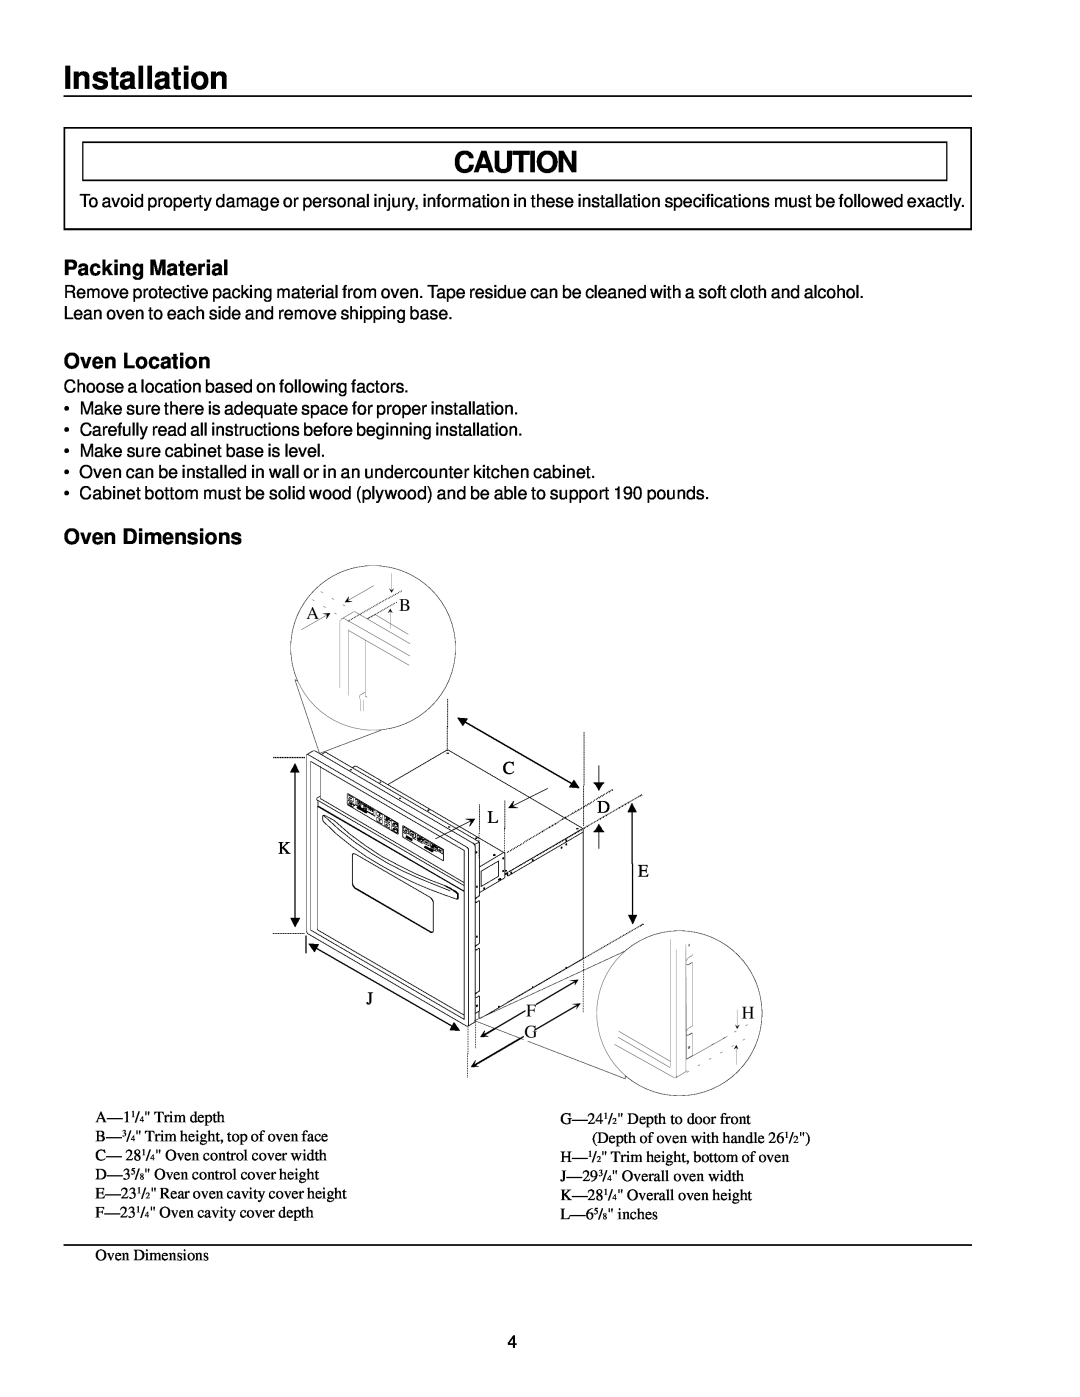 Amana AOCS3040 owner manual Installation, Packing Material, Oven Location, Oven Dimensions 